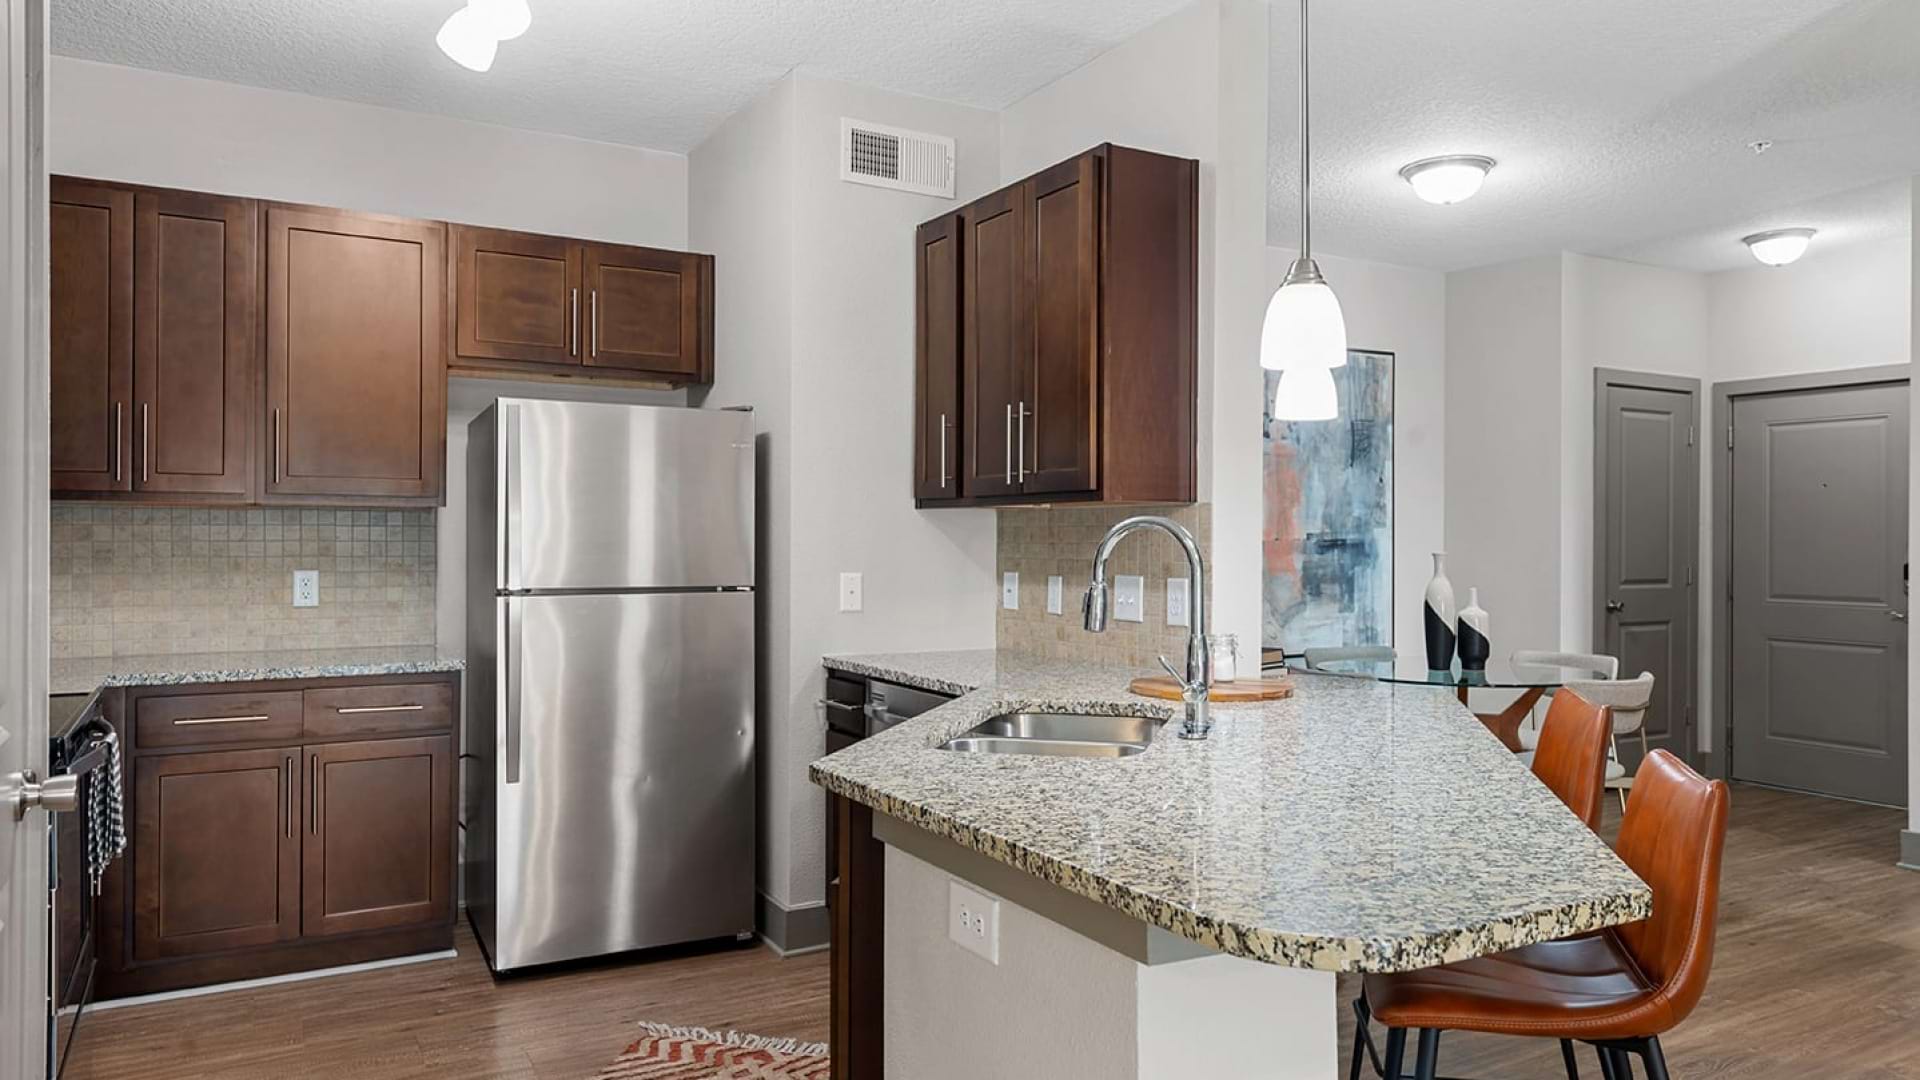 Modern Kitchen With Granite Countertops At Our Apartments In Charlotte, NC